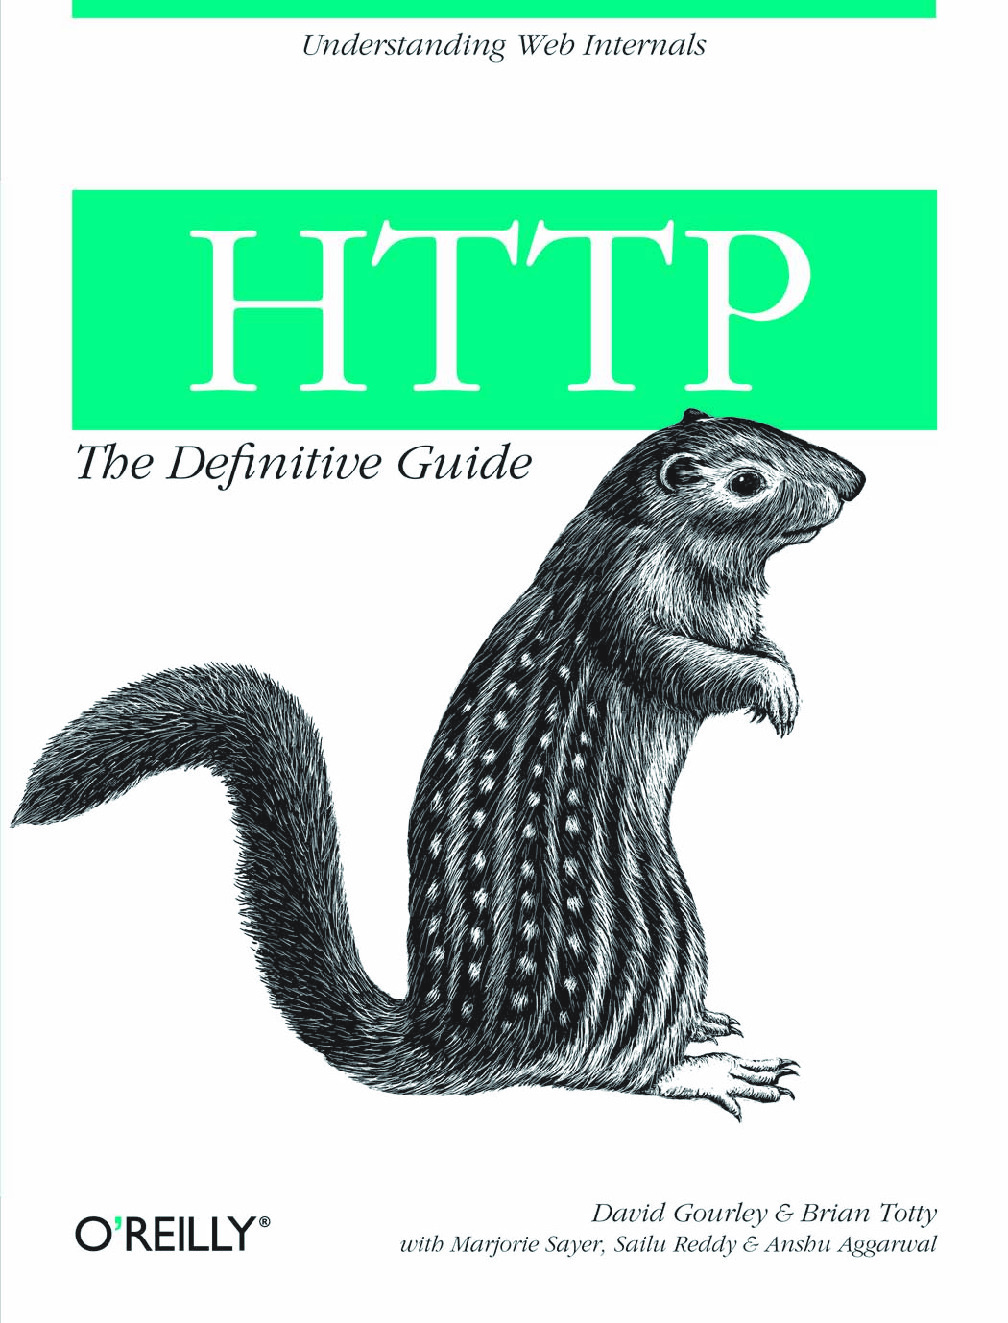 HTTP+The+Definitive+Guide